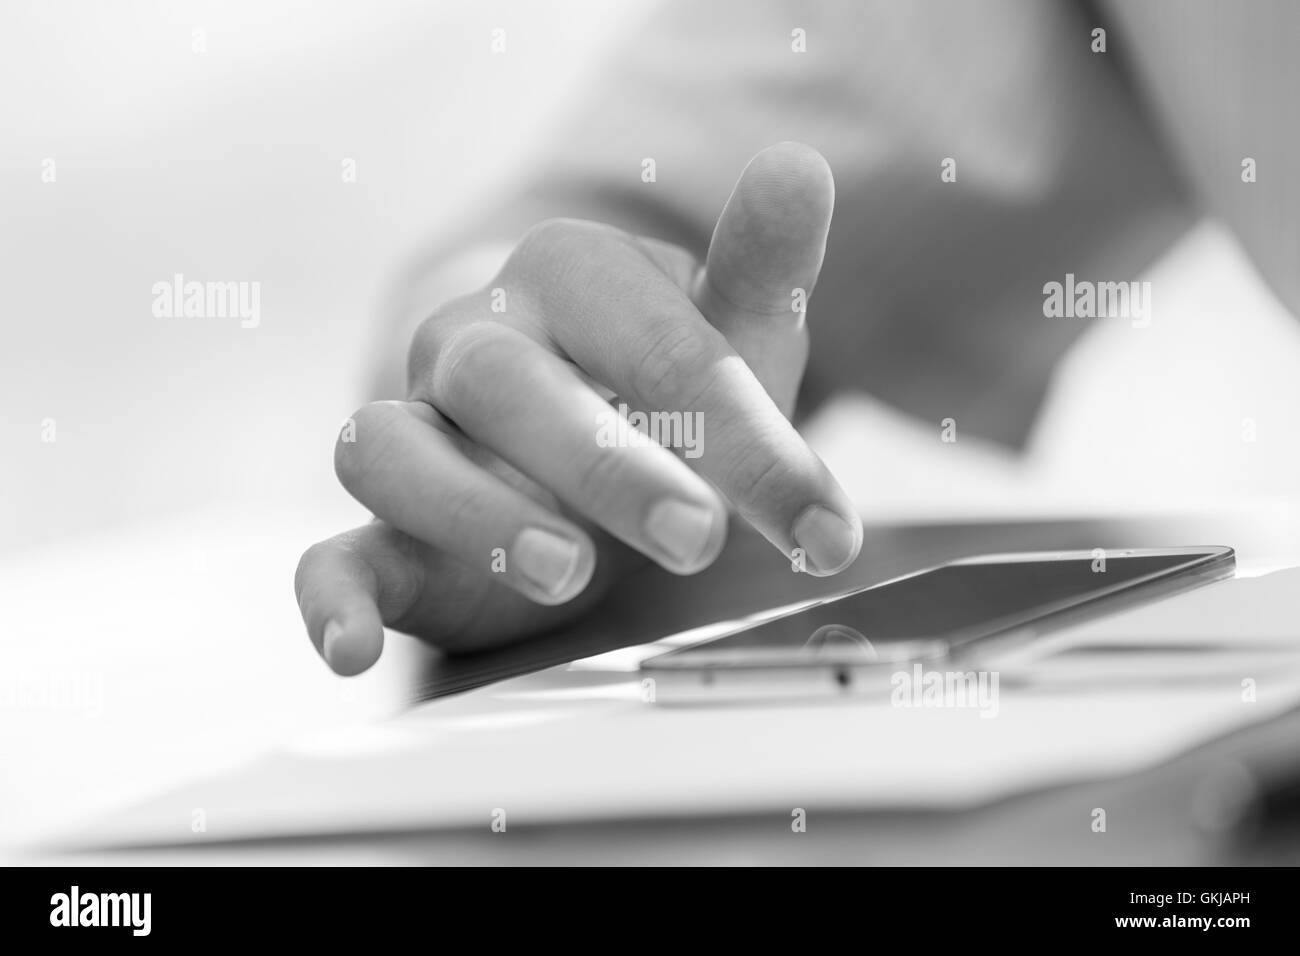 Male hand using smartphone gadget lying on a table. Black and white image Stock Photo